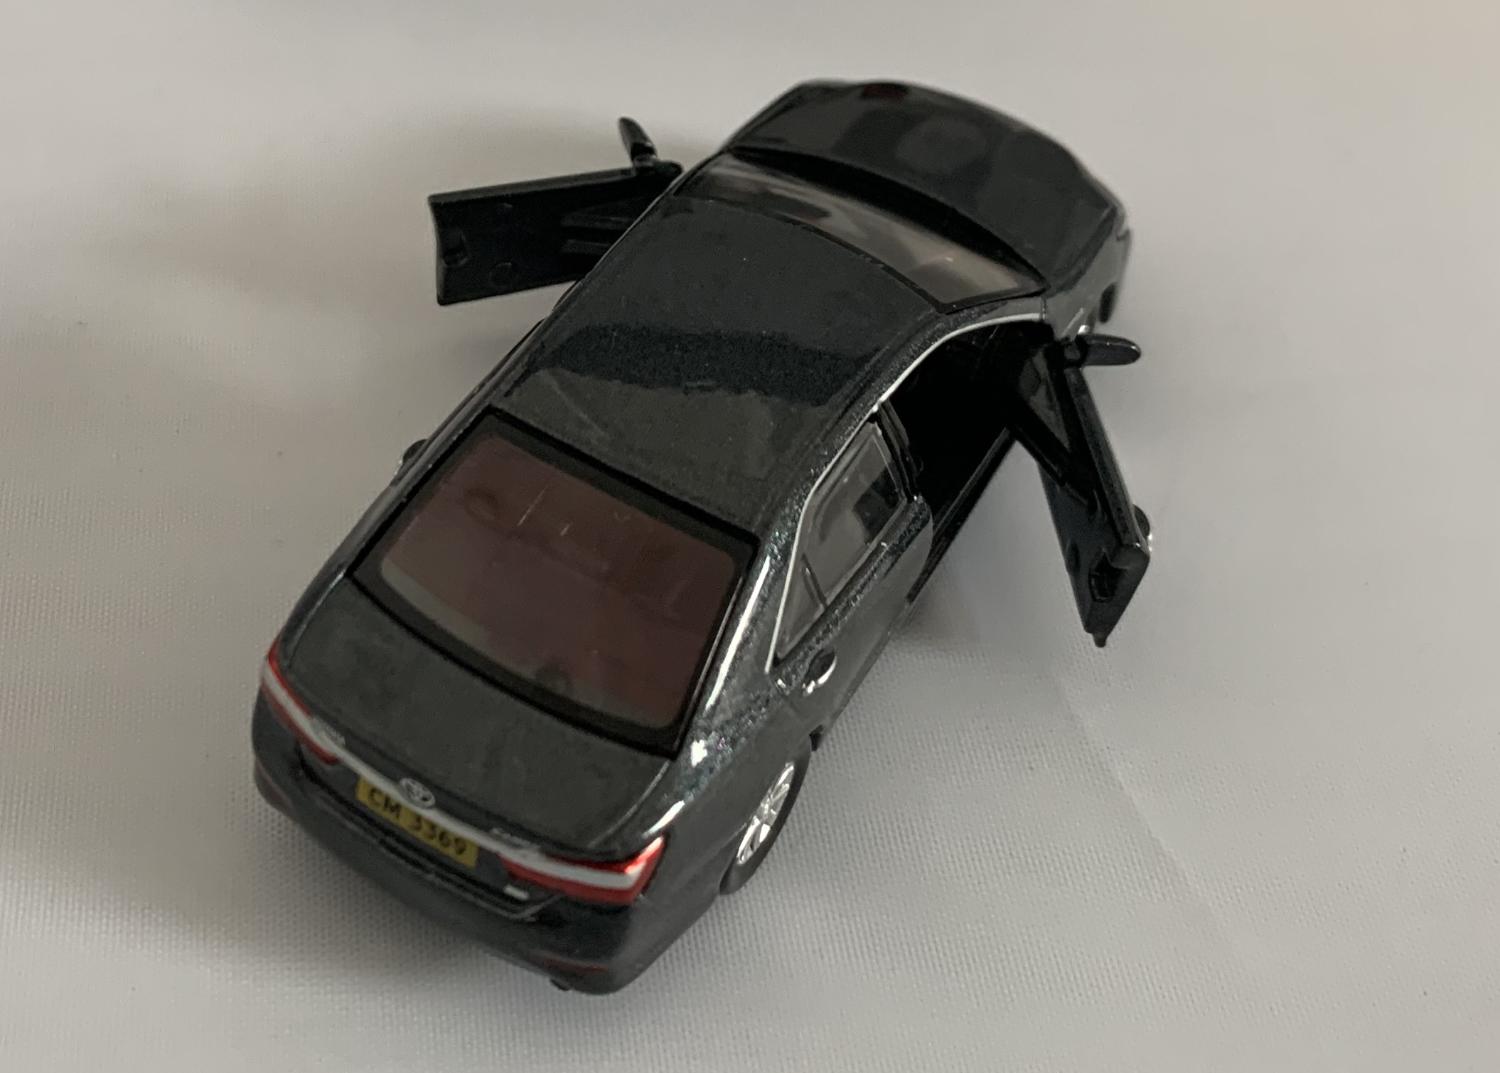 An excellent scale model of a Toyota Camry decorated in metallic grey with silver wheels.  Other trims are finished in black and silver.  Features include opening driver and passenger doors and working wheels.  The interior is finished in black with RHD steering wheel.